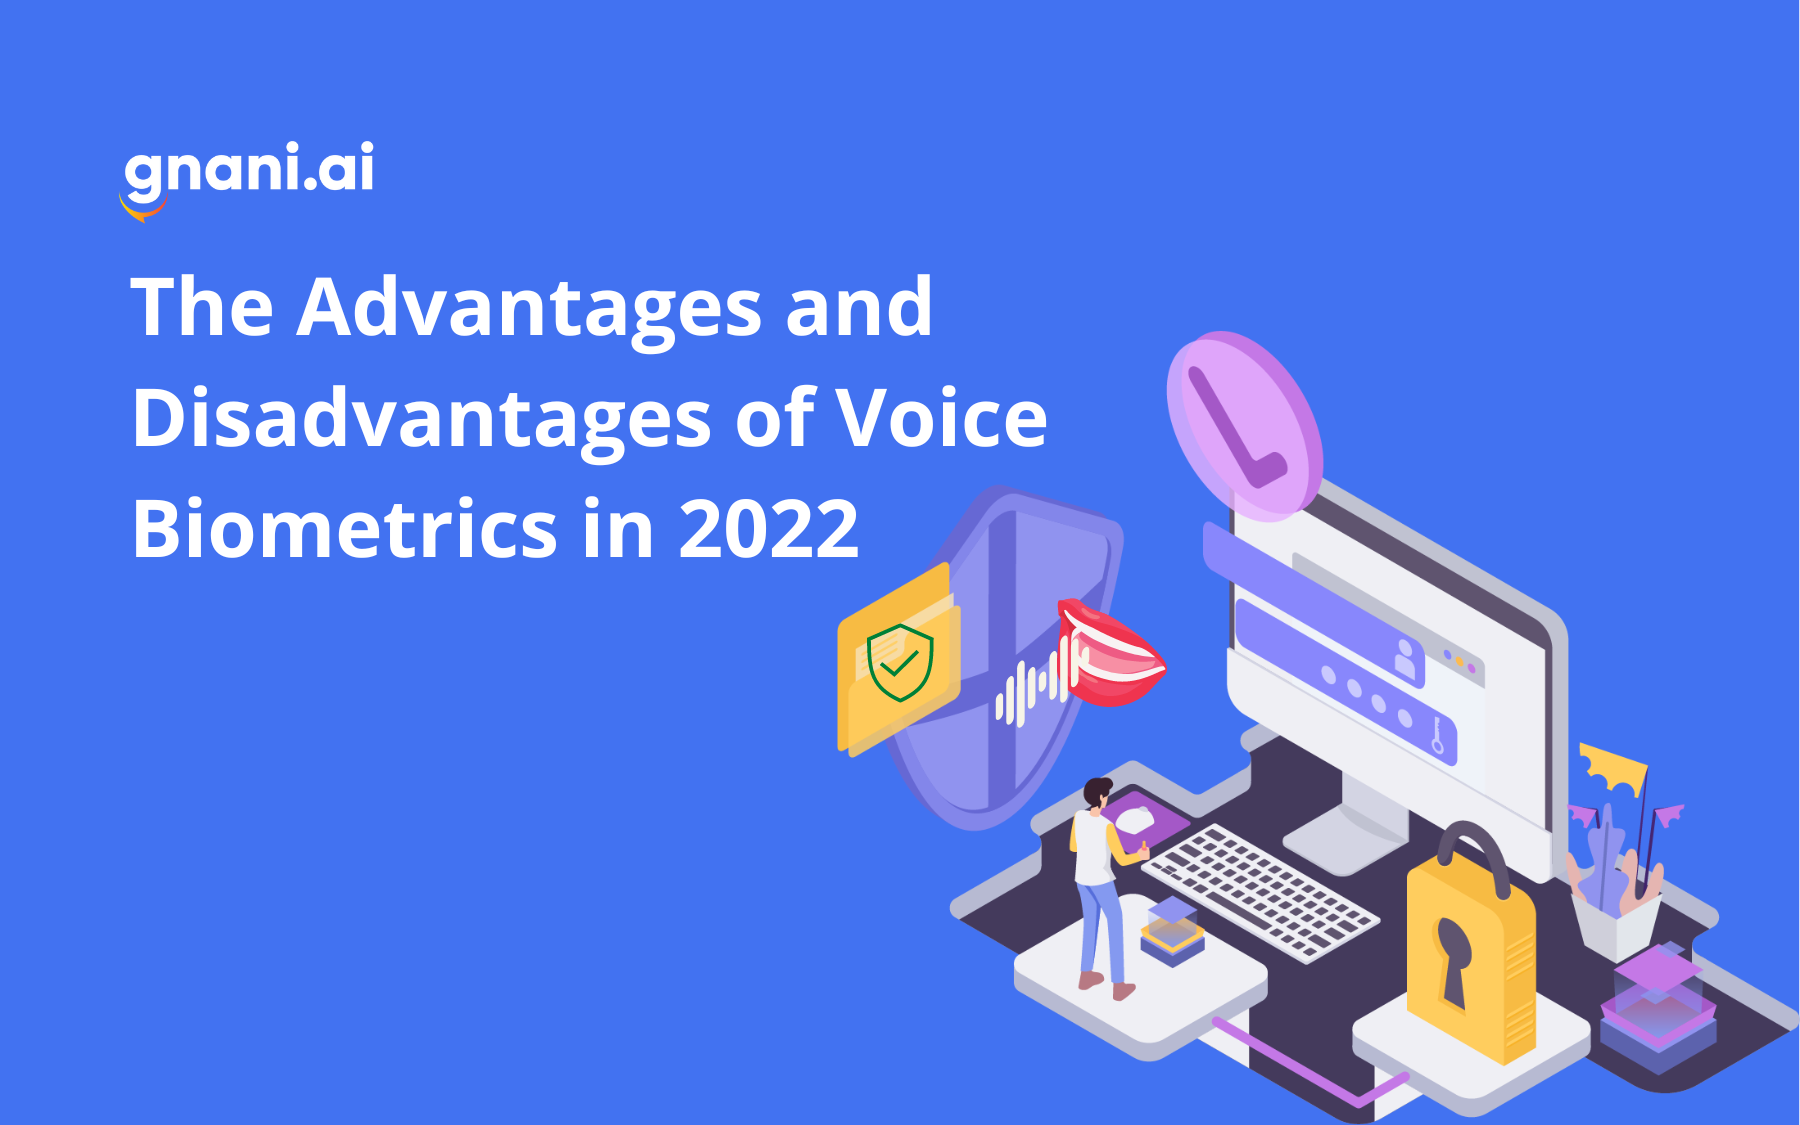 The Advantages and Disadvantages of Voice Biometrics in 2022